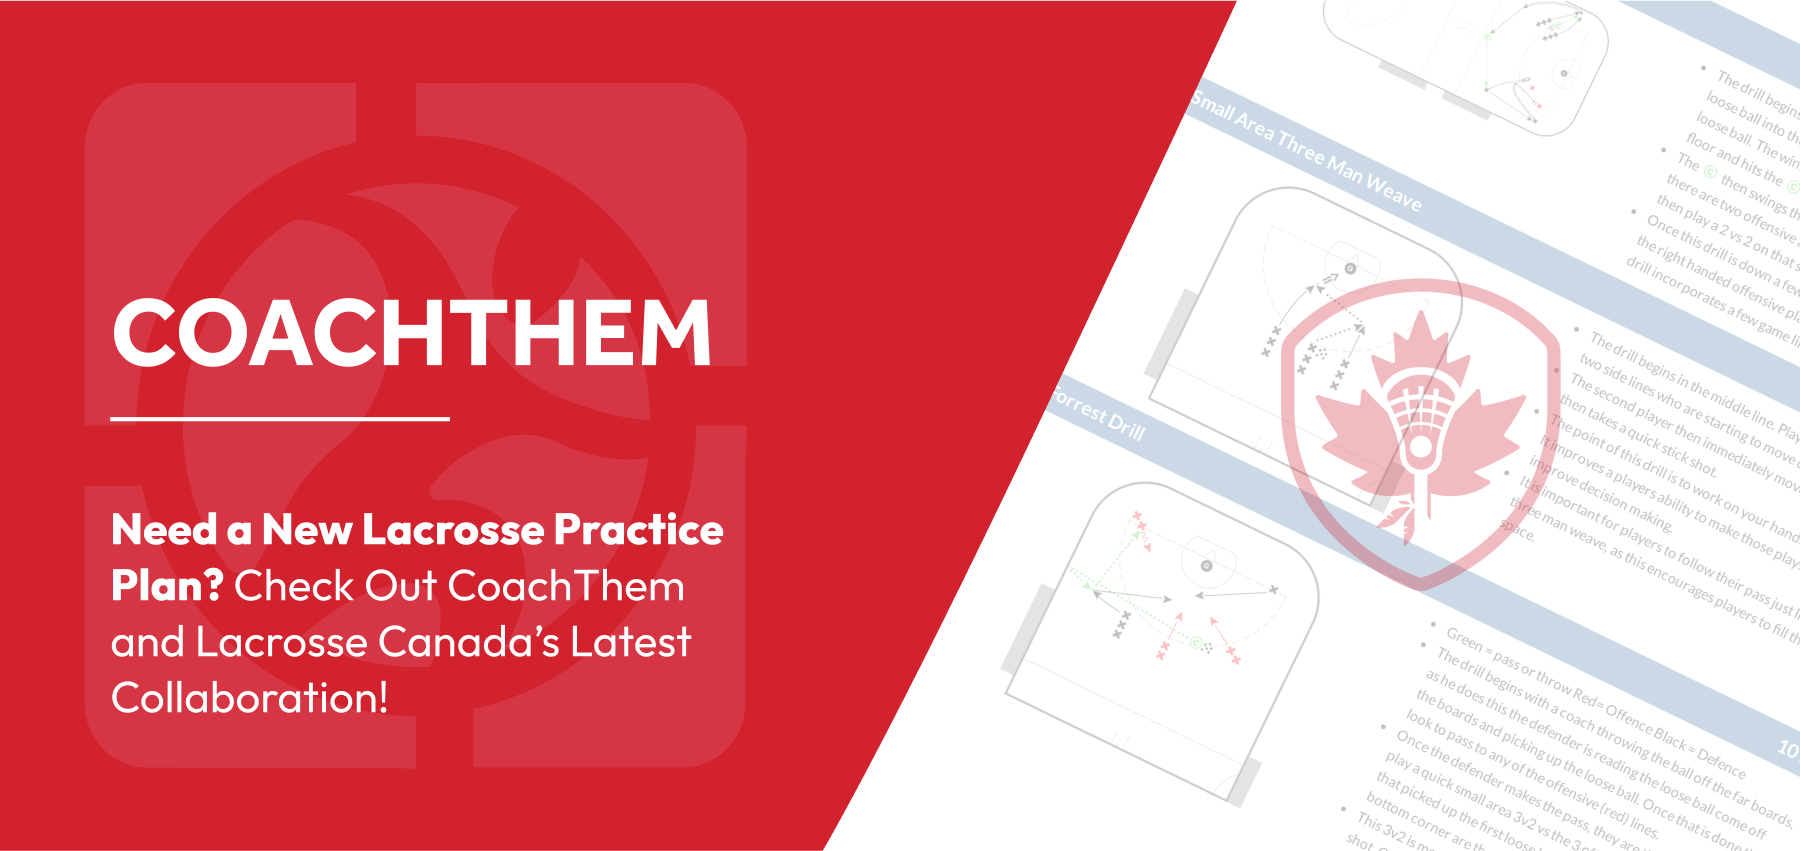 Need a New Lacrosse Practice Plan? Check Out CoachThem and Lacrosse Canada’s Latest Collaboration!